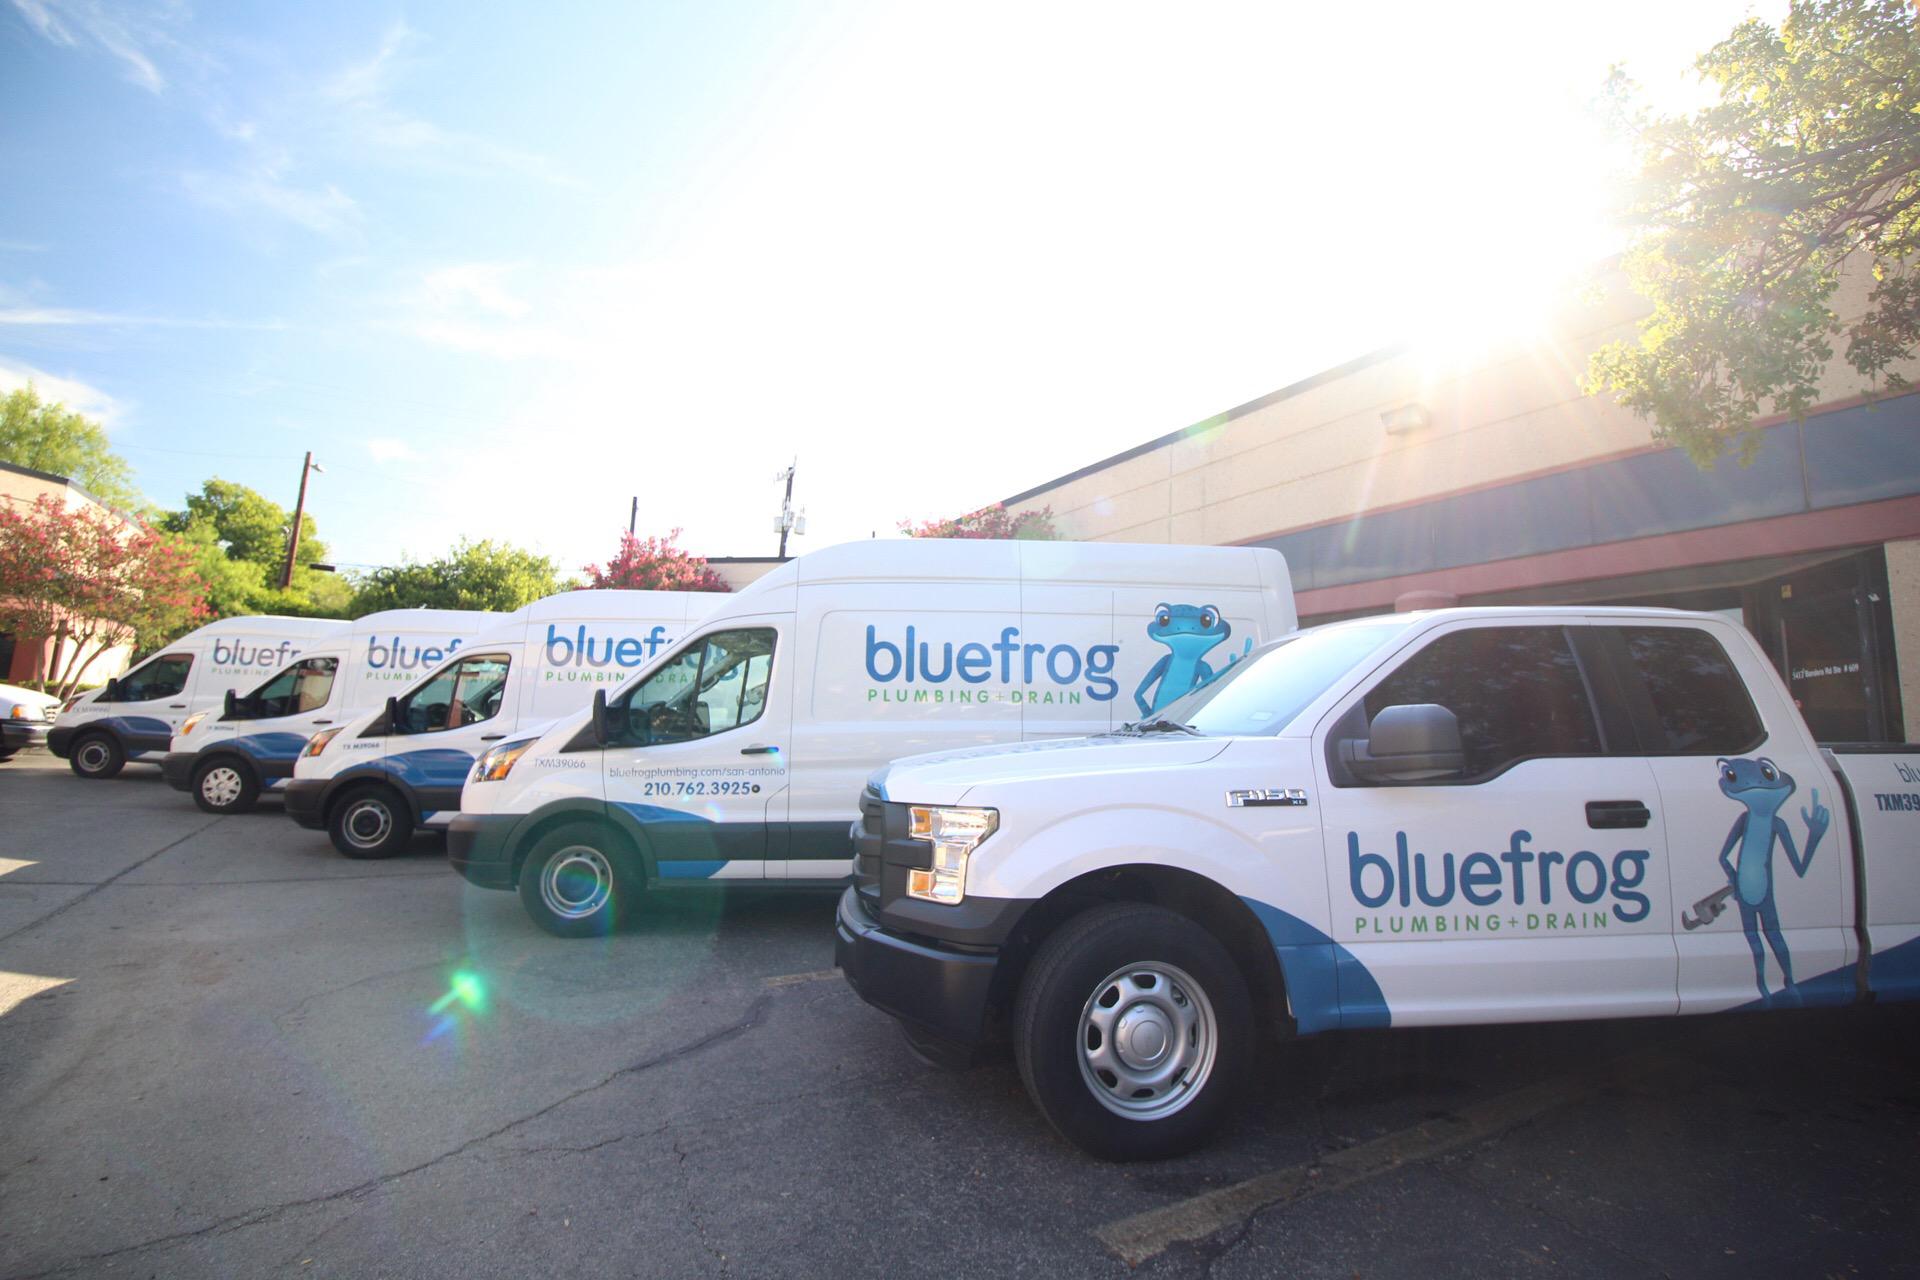 All of the bluefrog Plumbing + Drain of San Antonio vehicles ready for all of your plumbing service needs.